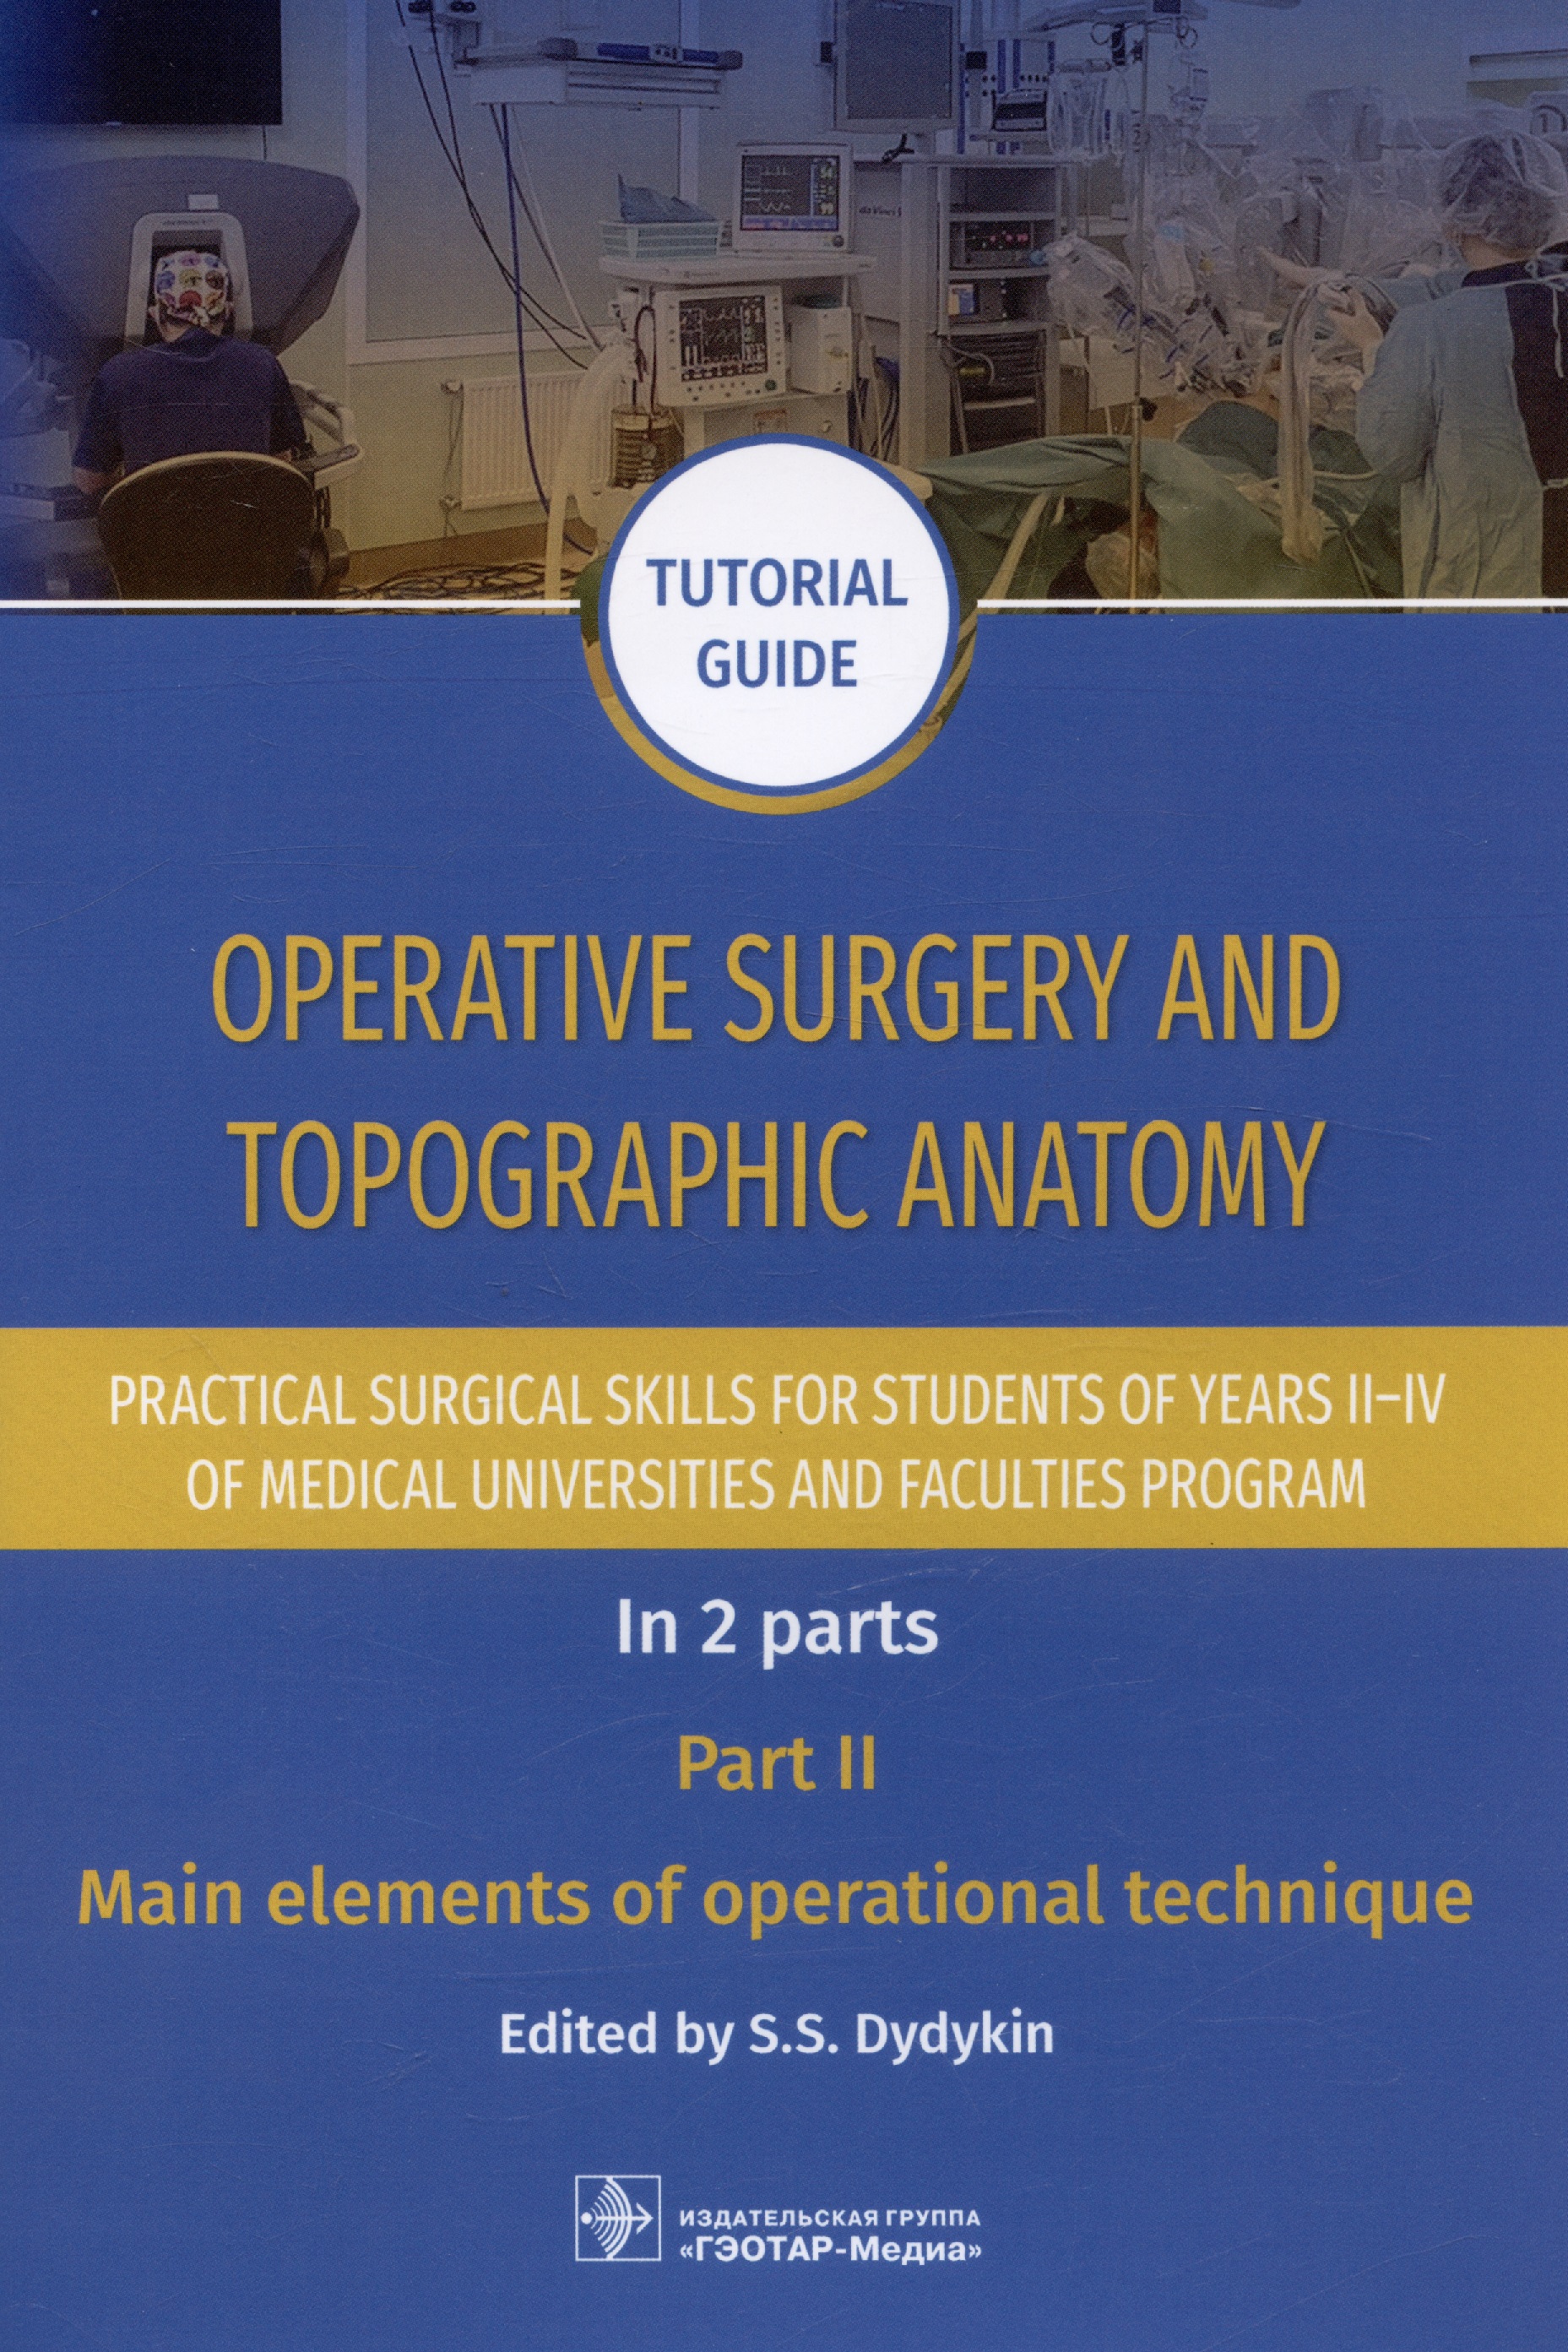 Operative surgery and topographic anatomy. Practical surgical skills for students of years II–IV of medical universities and faculties program: tutorial guide. In 2 parts. Part II. Main elements of operational technique